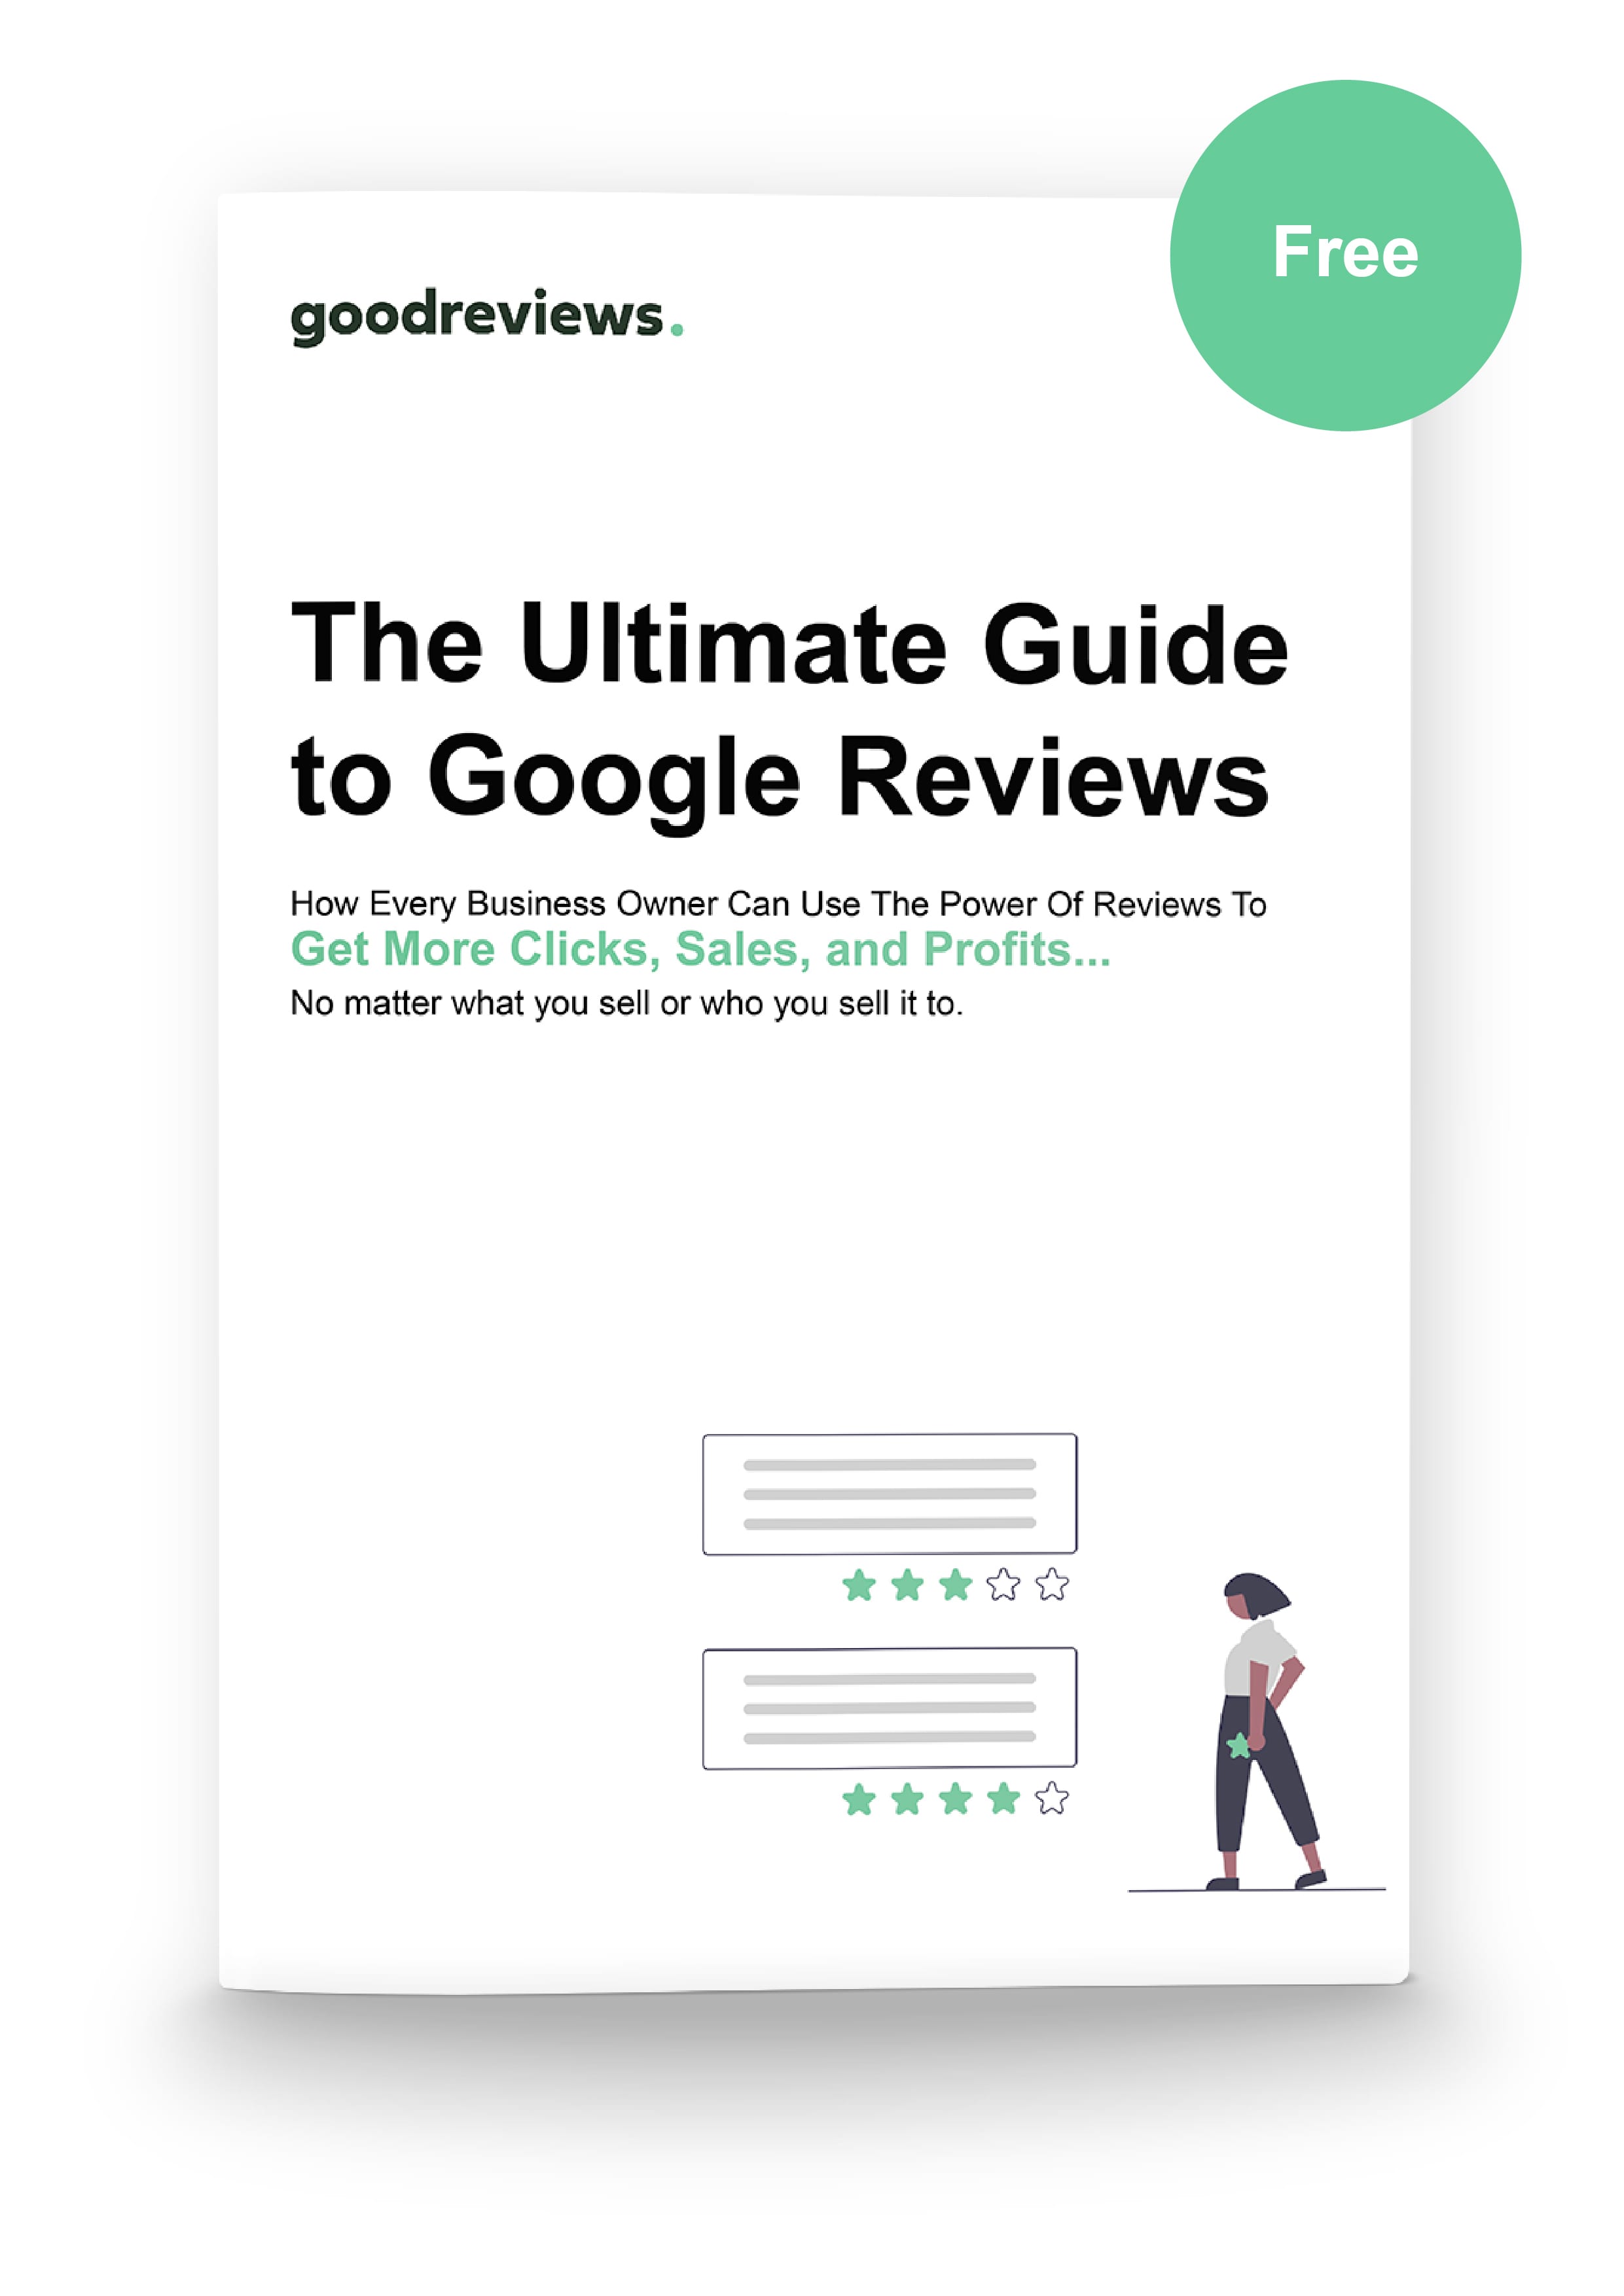 A book on Google Reviews